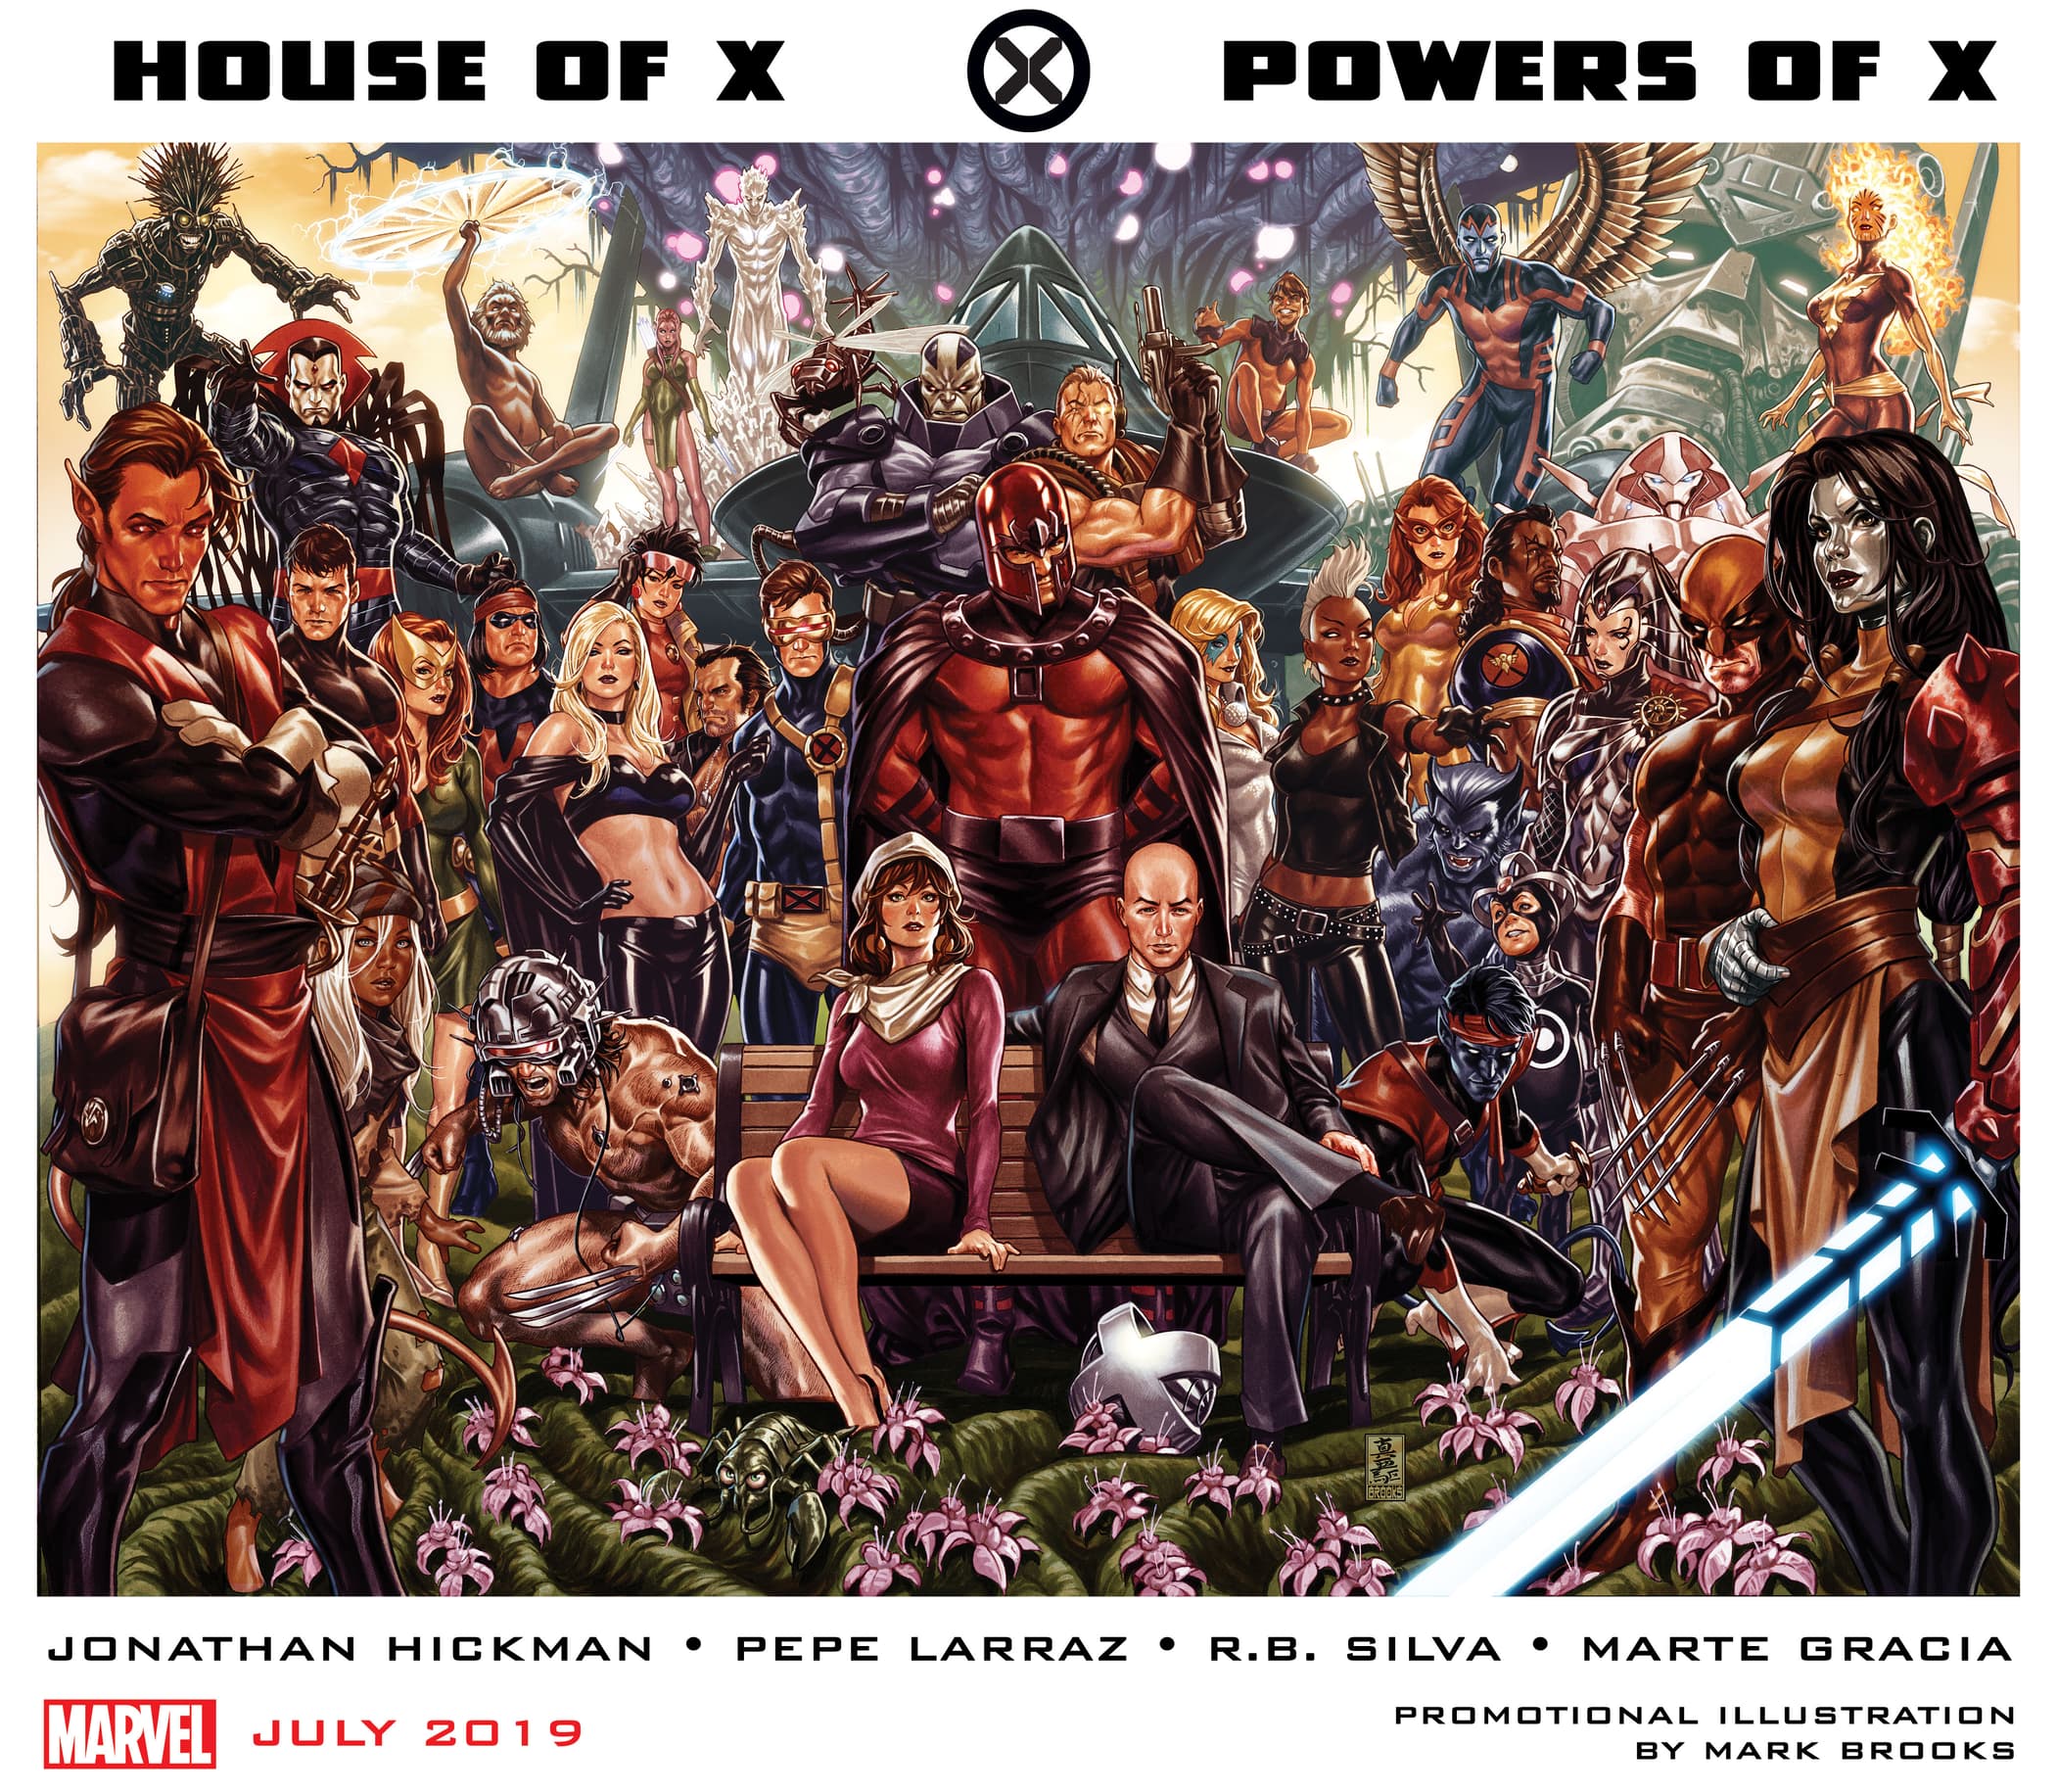 HOUSE OF X and POWERS OF X